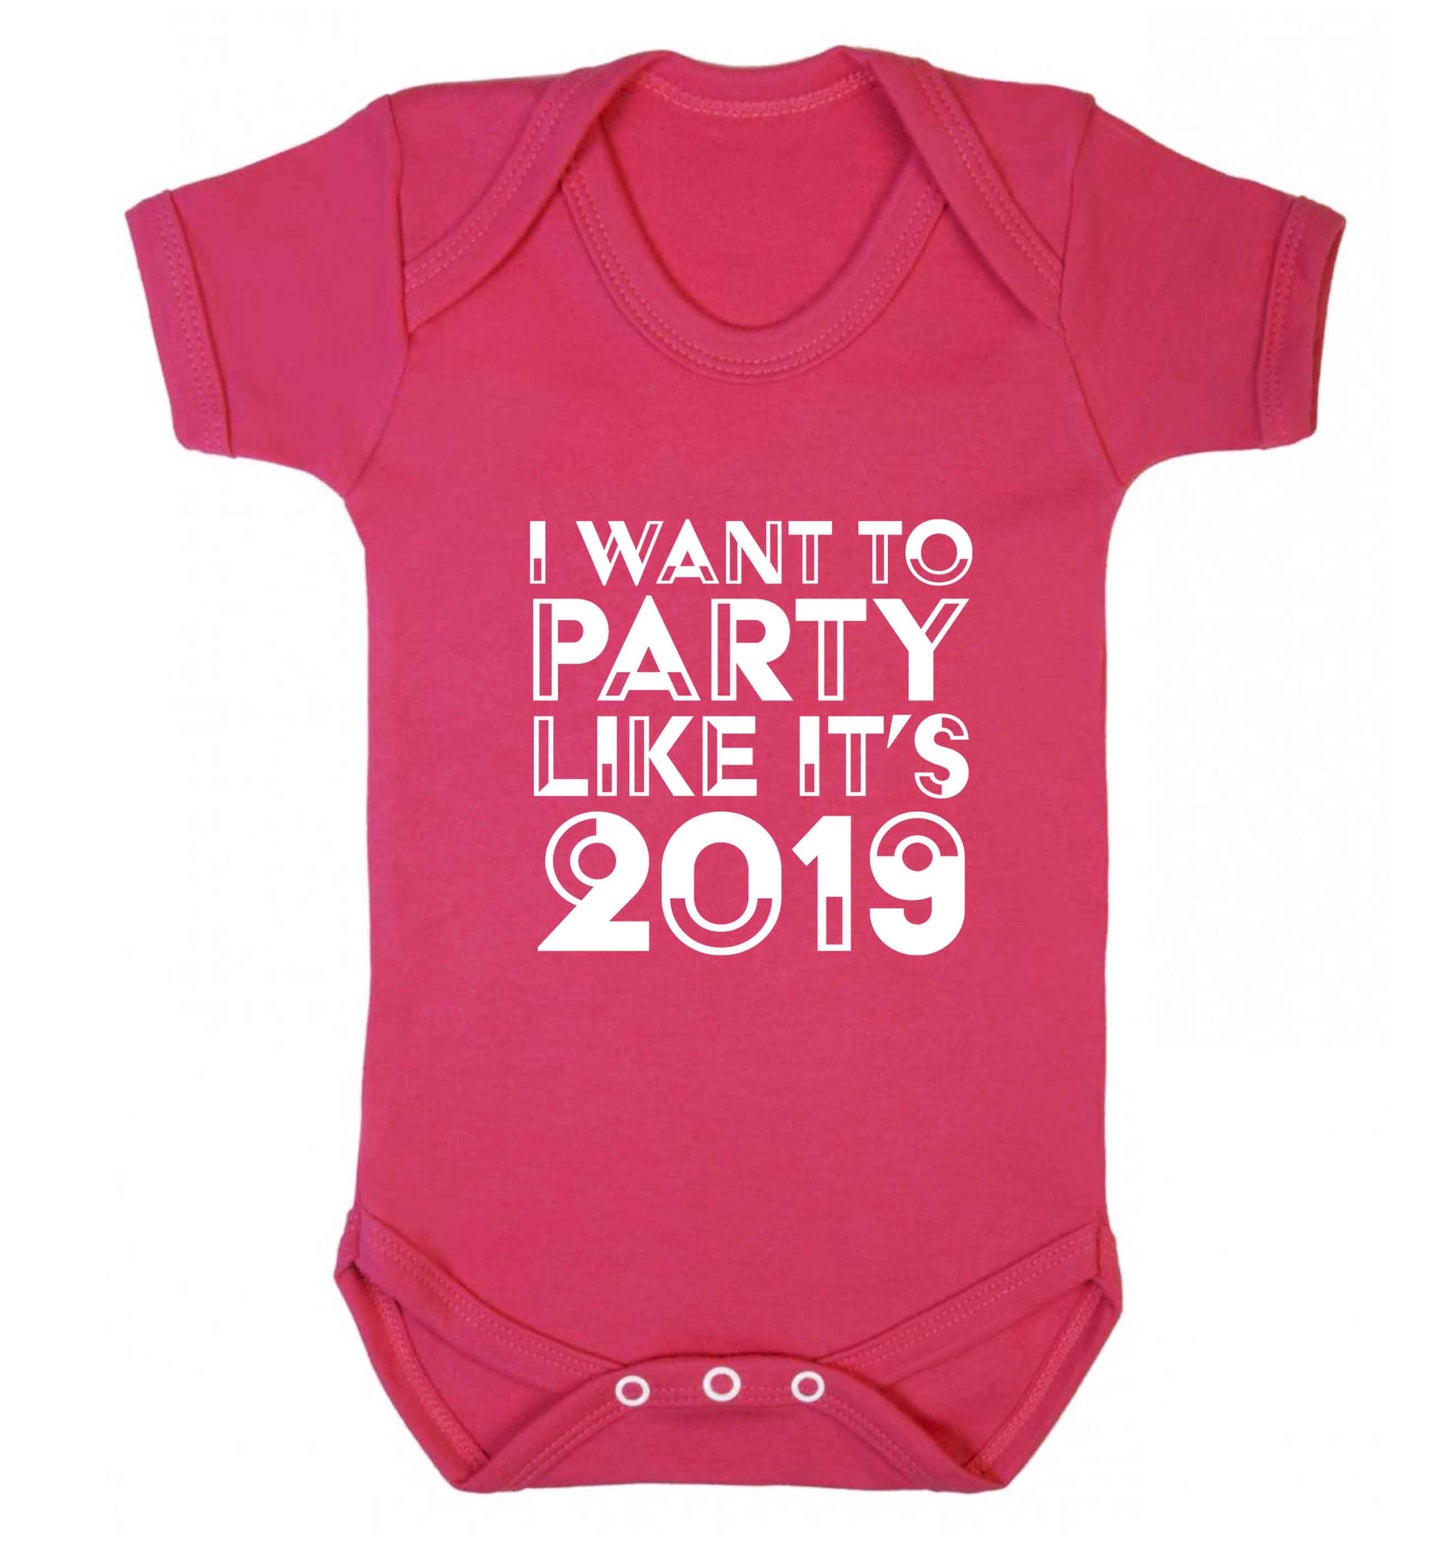 I want to party like it's 2019 baby vest dark pink 18-24 months